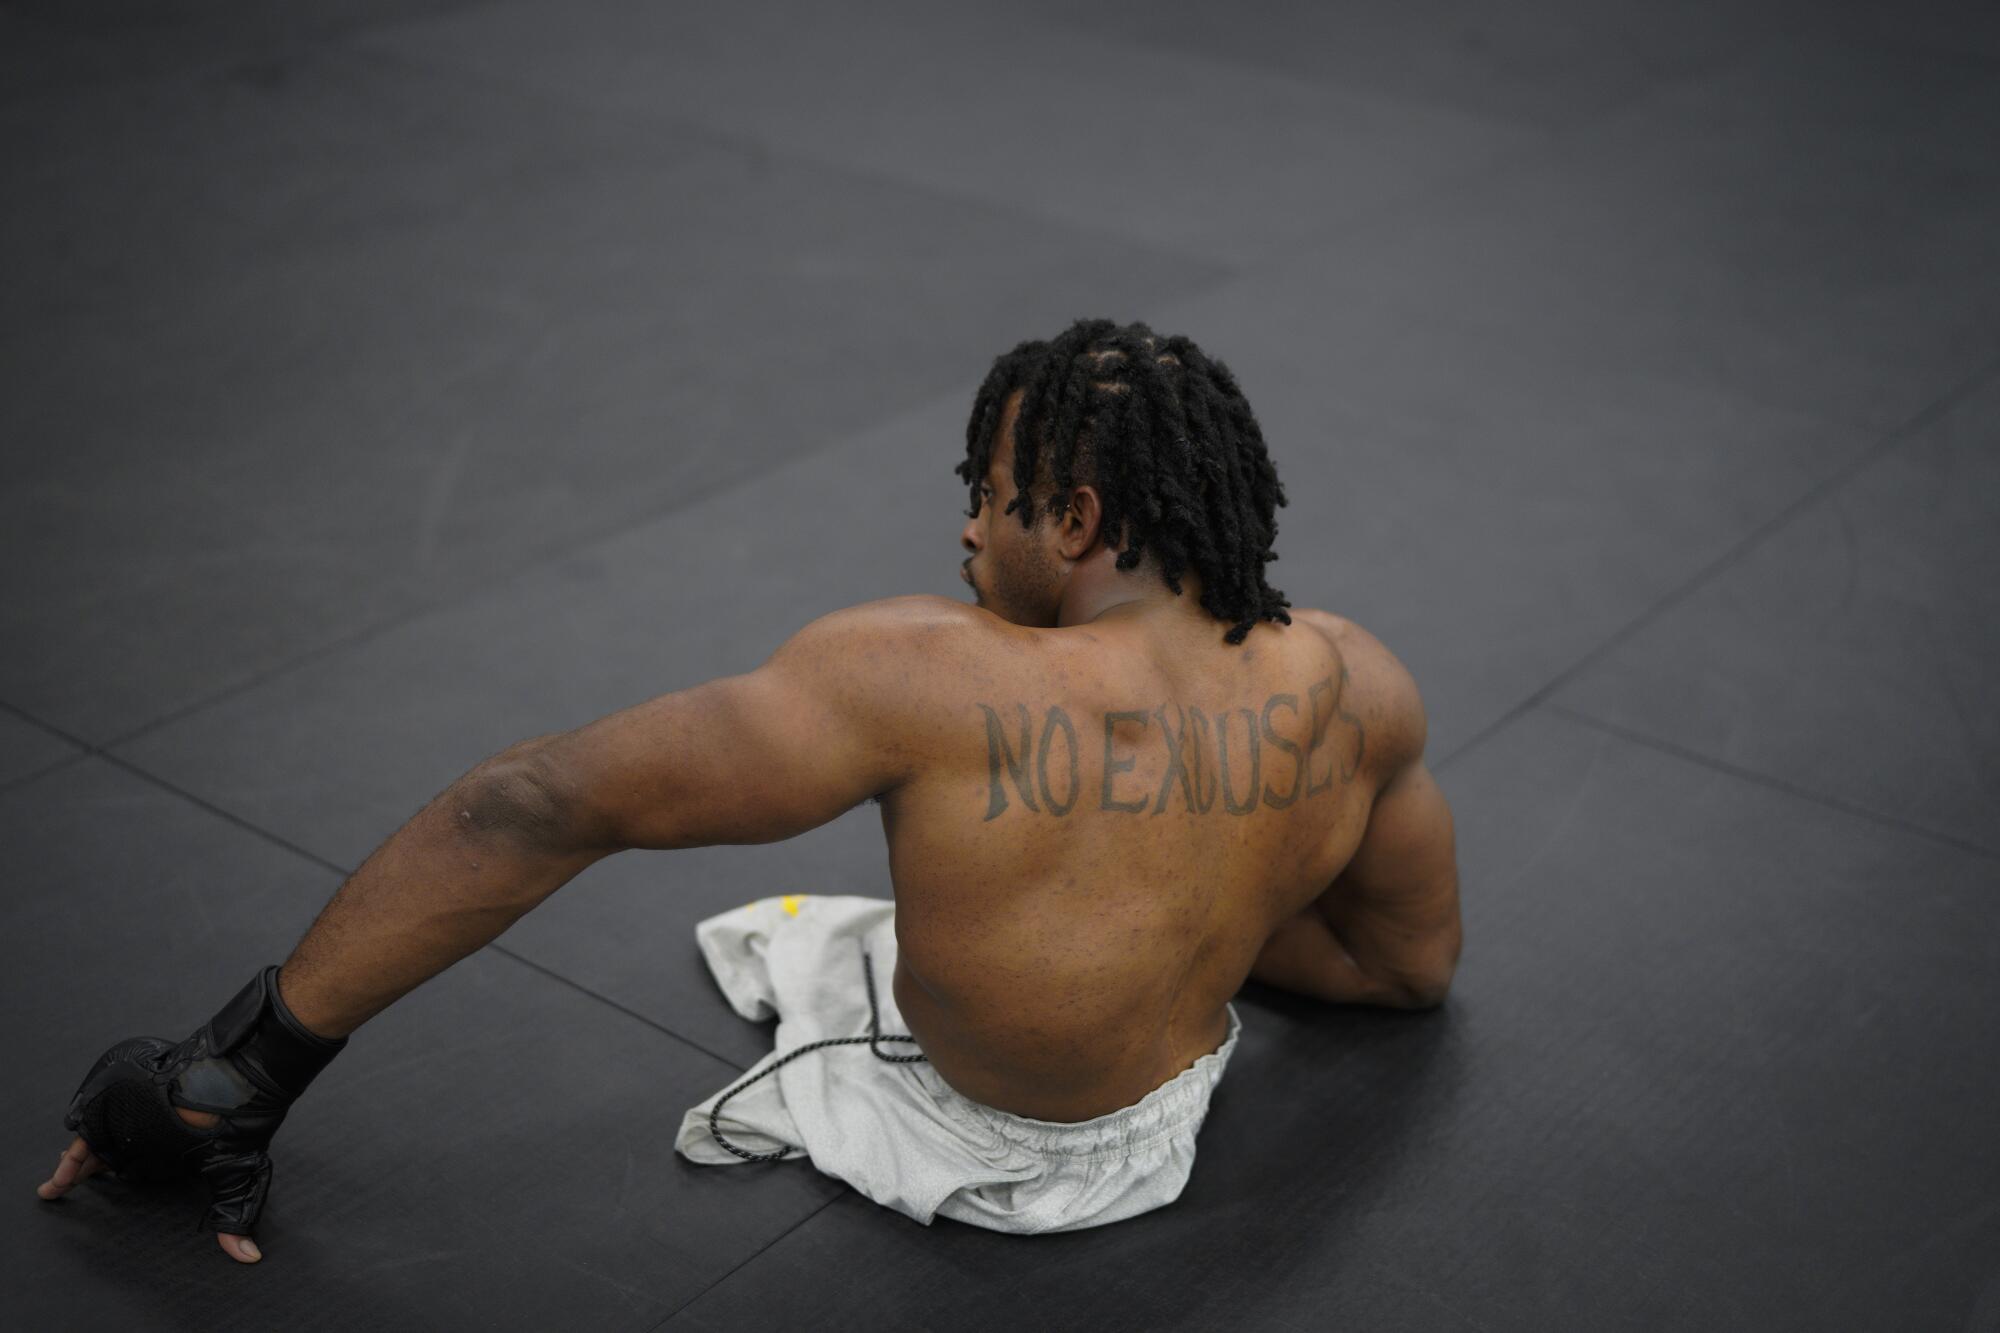 Zion Clark has the words "NO EXCUSES" tattooed on his back. It's part of his never-give-up philosophy on life.  